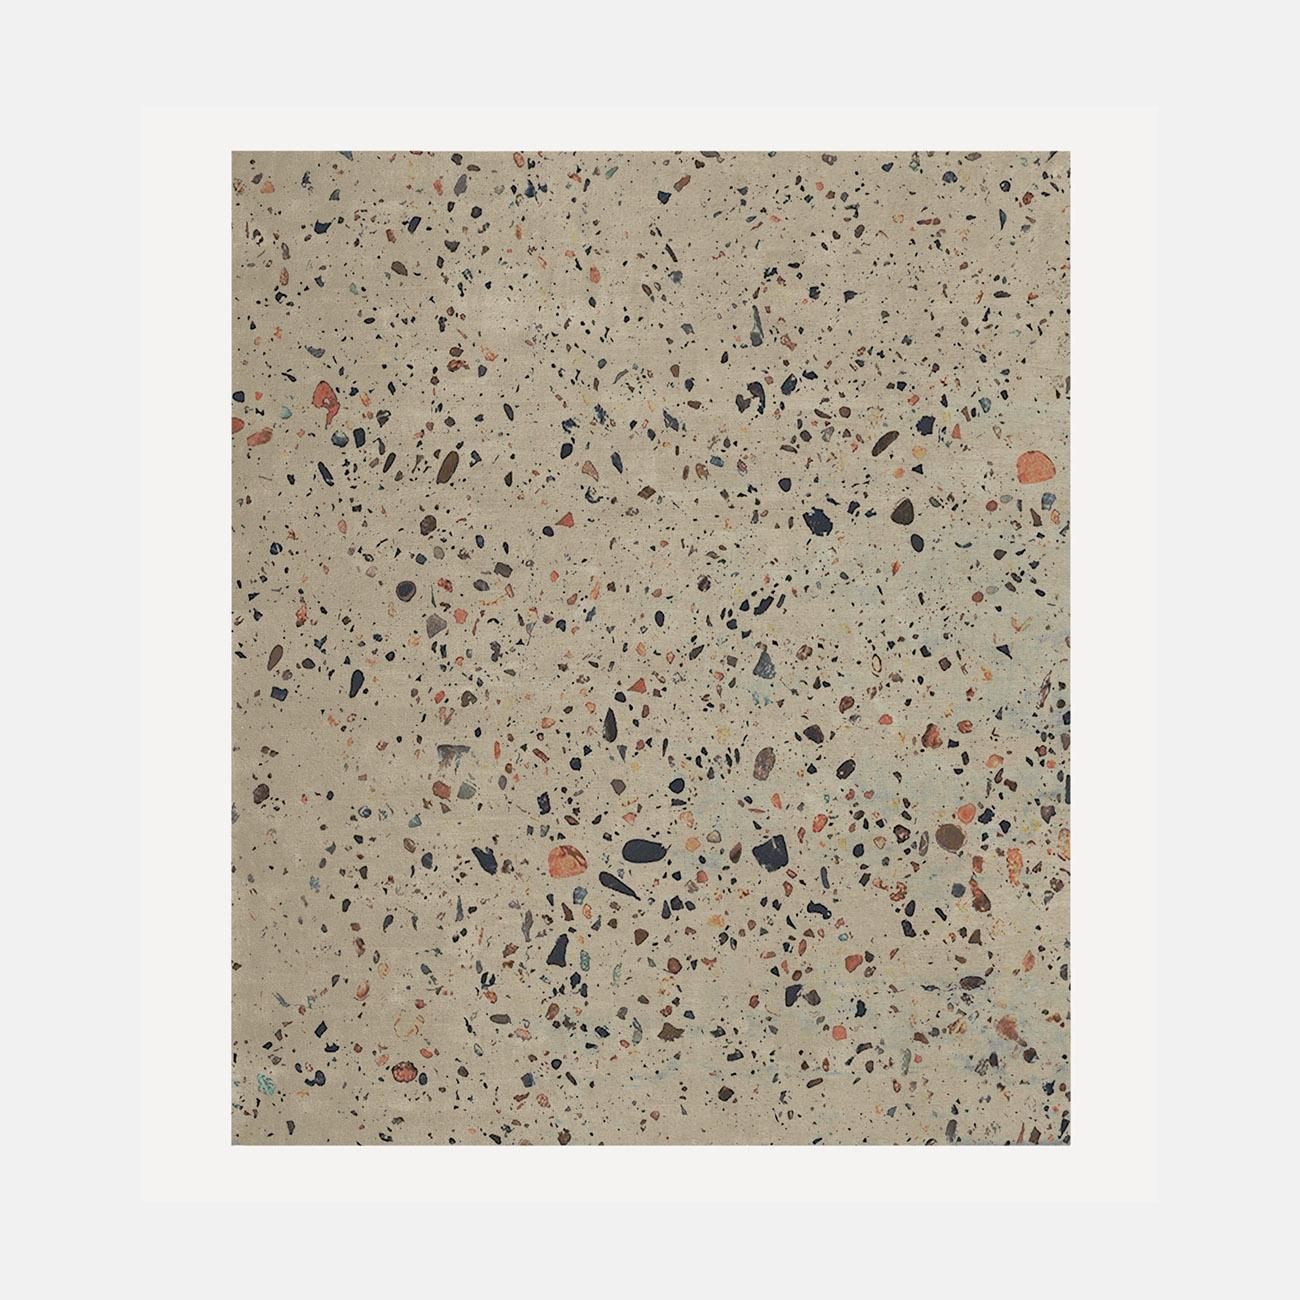 Terrazzo Rug by Atelier Bowy C.D.
Dimensions: W 243 x L 300 cm.
Materials: Wool, silk.

Available in D170, D200, D240, W140 x L220, W200 x L200, W170 x L240, W210 x L300, W243 x L300 cm.

Atelier Bowy C.D. is dedicated to crafting contemporary